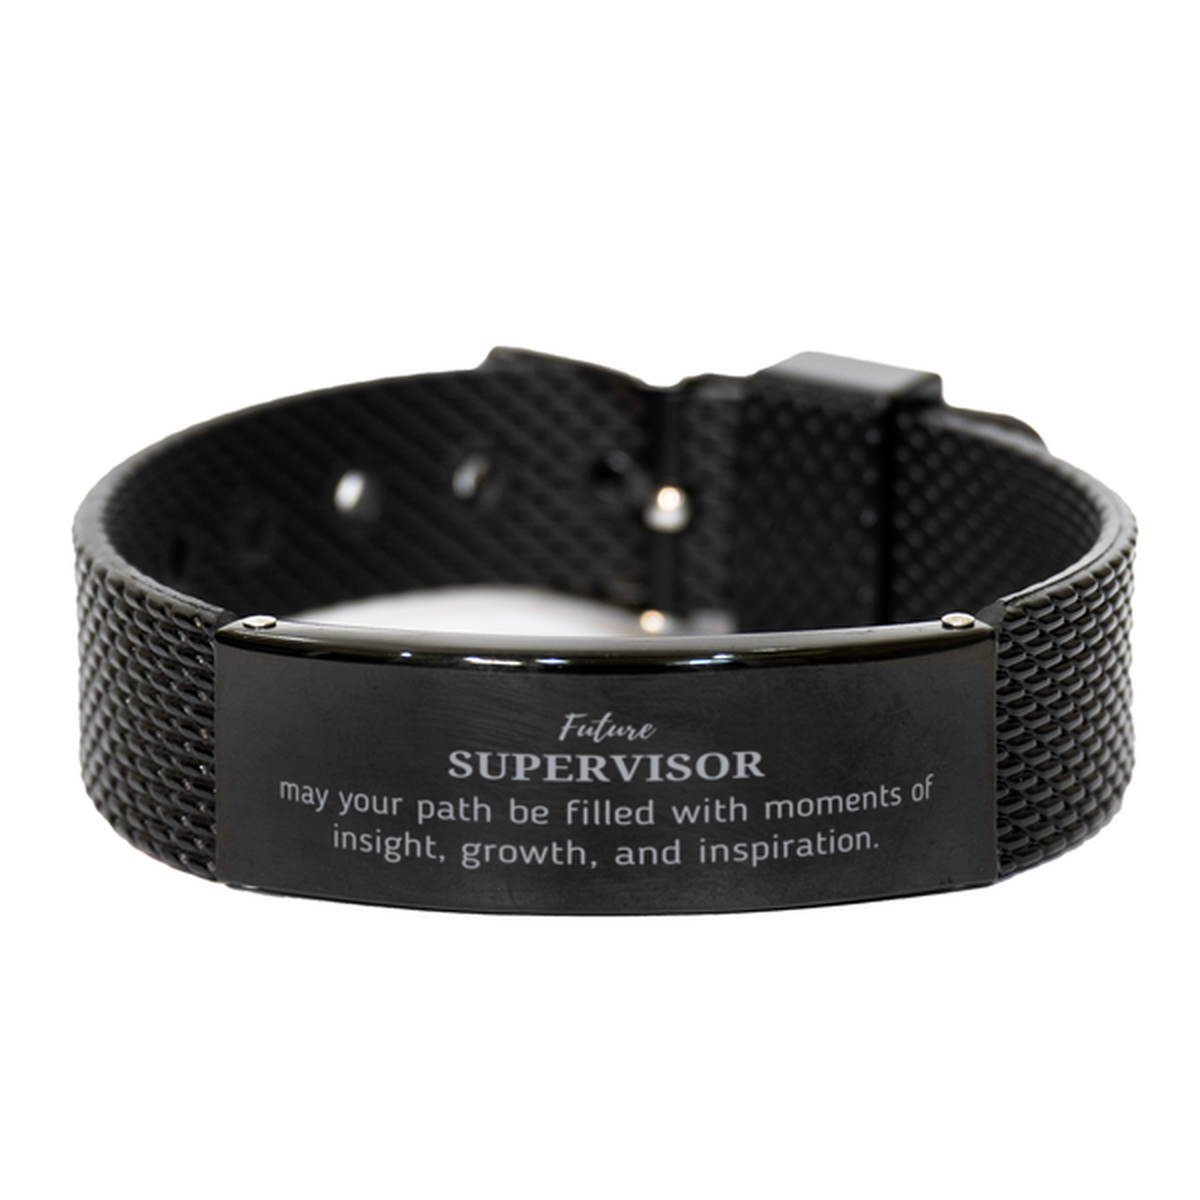 Future Supervisor Gifts, May your path be filled with moments of insight, Graduation Gifts for New Supervisor, Christmas Unique Black Shark Mesh Bracelet For Men, Women, Friends